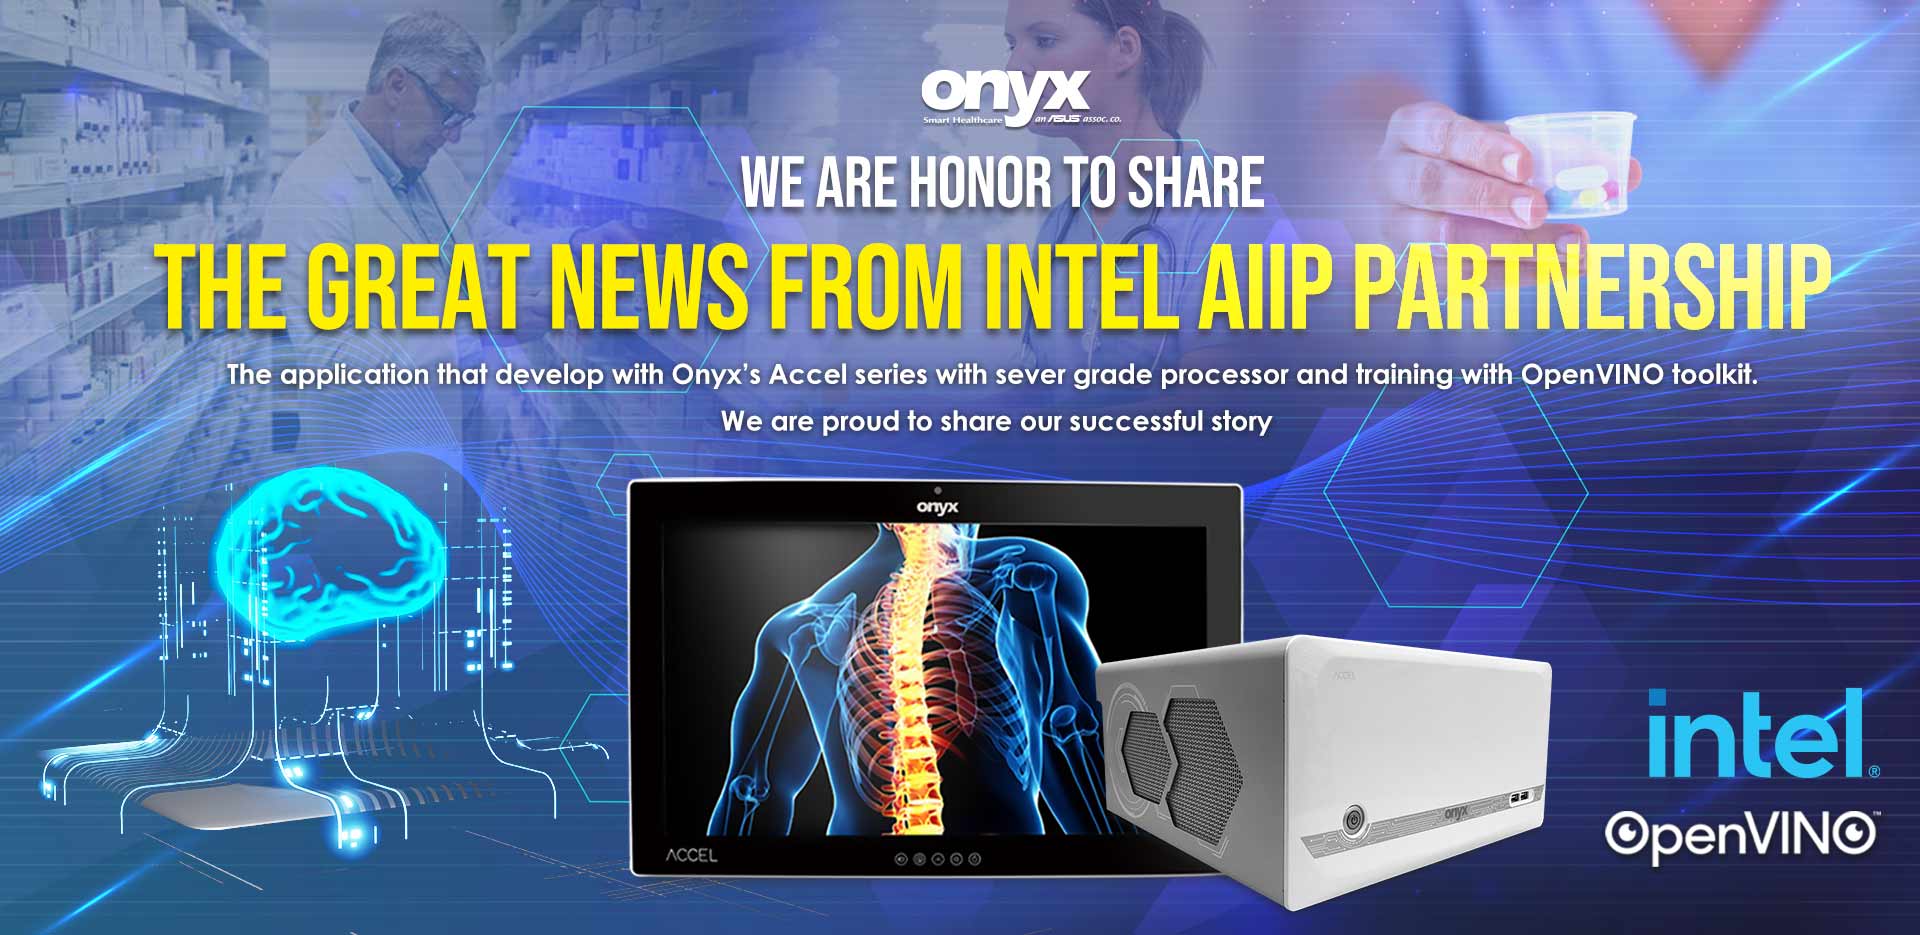 We are honor to share the great News from intel AIIP partnership